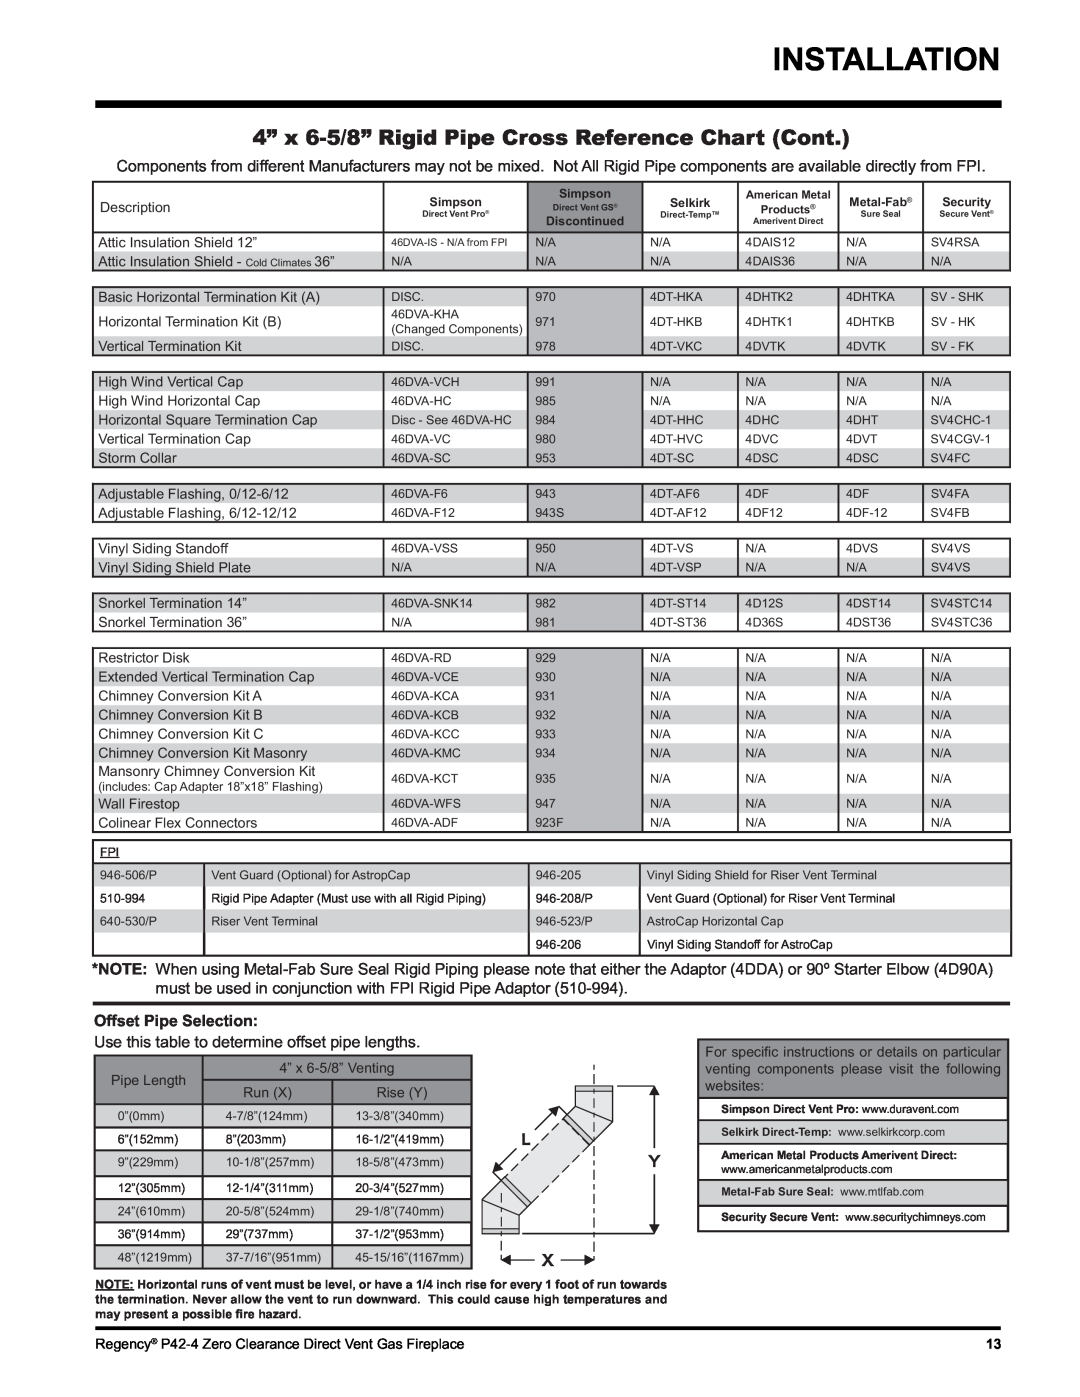 Regency P42-LP4, P42-NG4 installation manual 4” x 6-5/8”Rigid Pipe Cross Reference Chart Cont, Offset Pipe Selection 